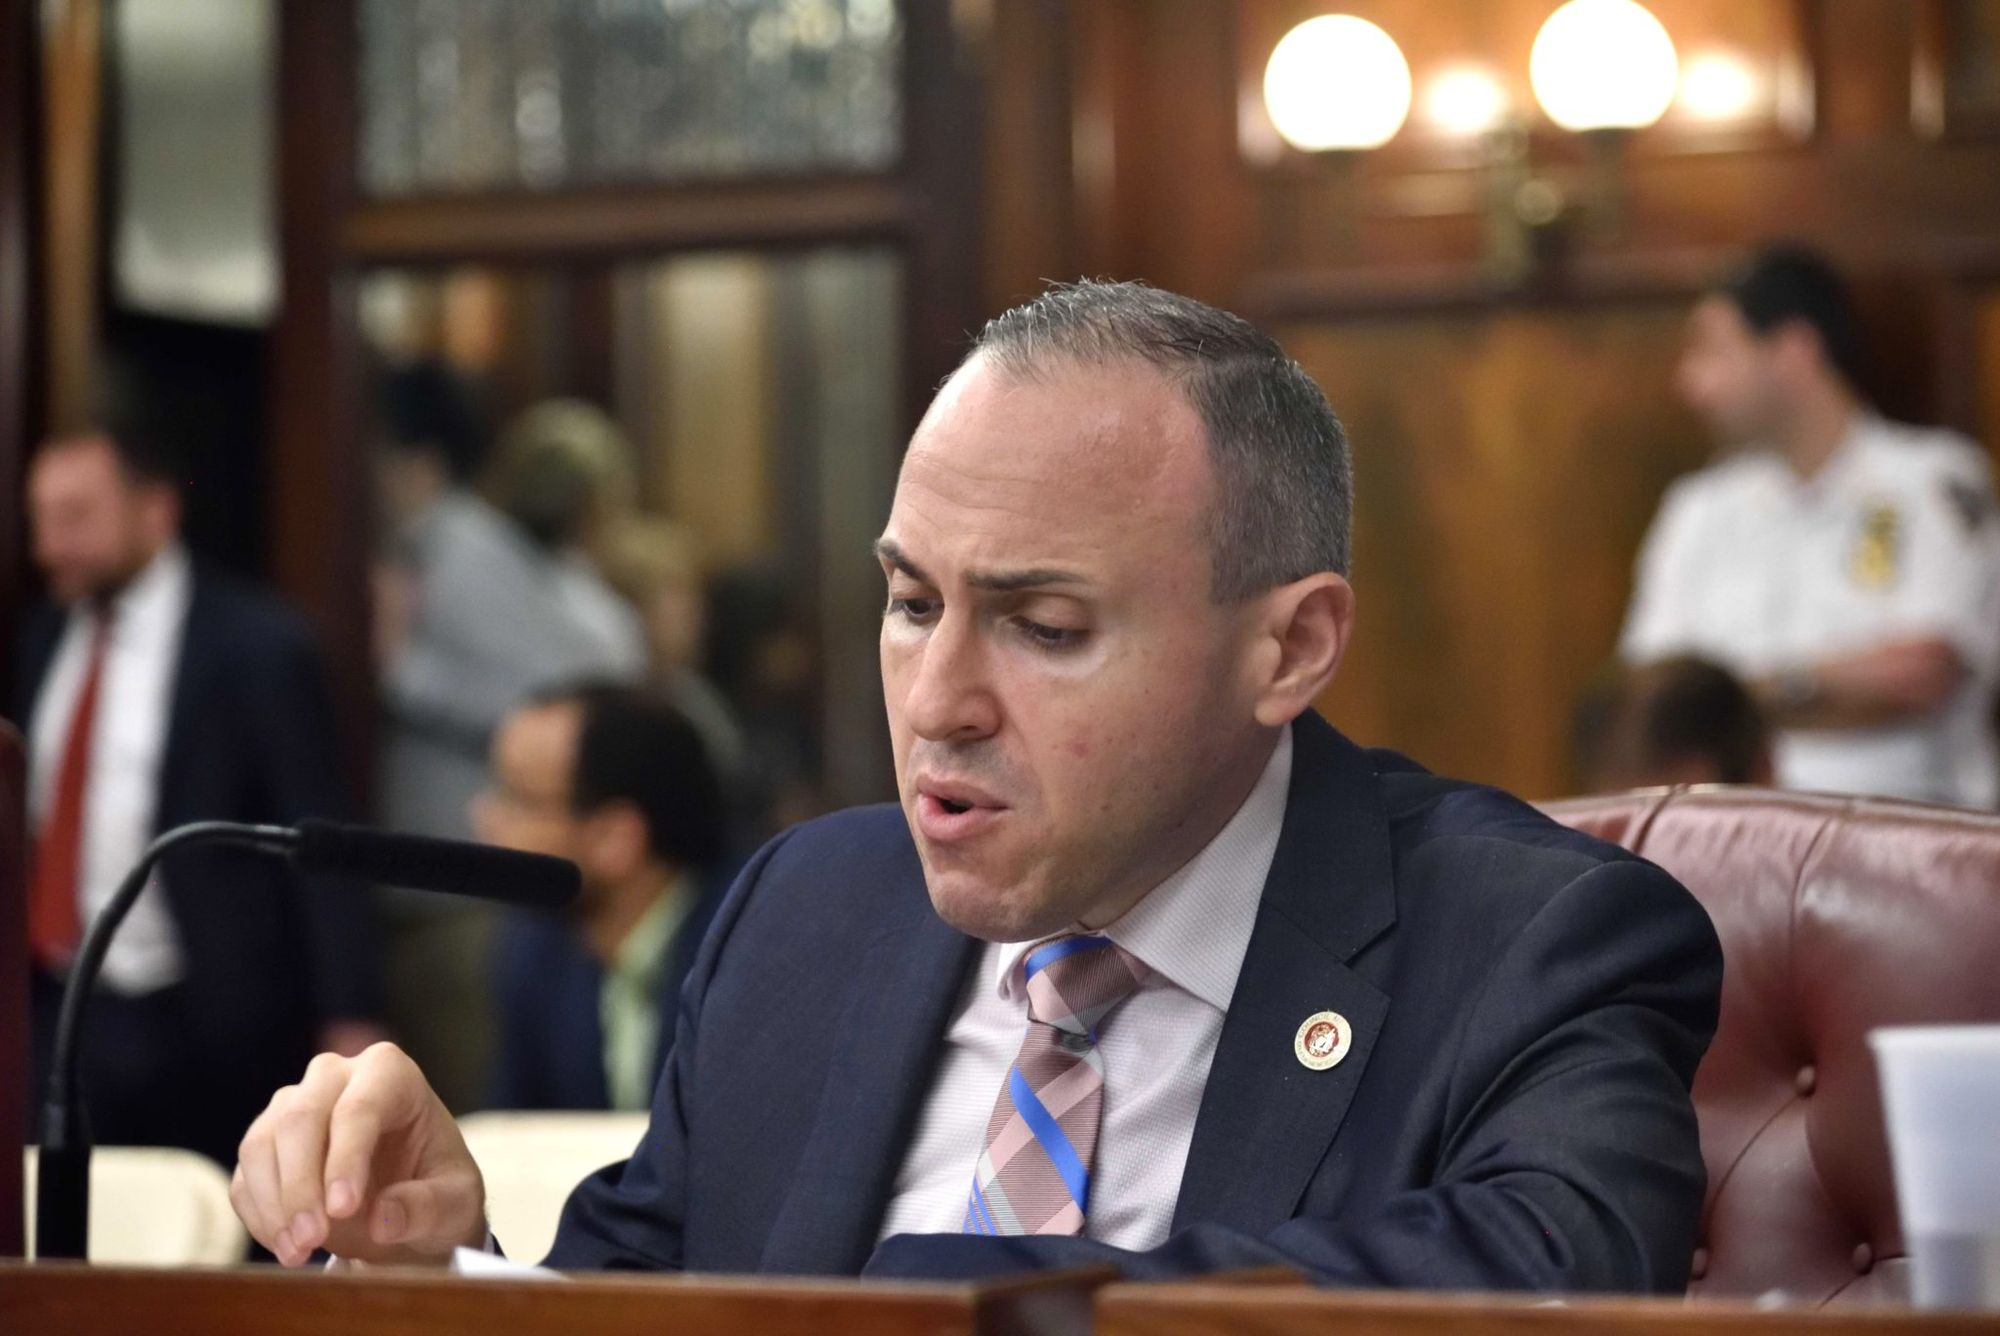 Councilmember Treyger’s Legislation Will Explicitly Outlaw Sex Between Police Officers And Those In Custody